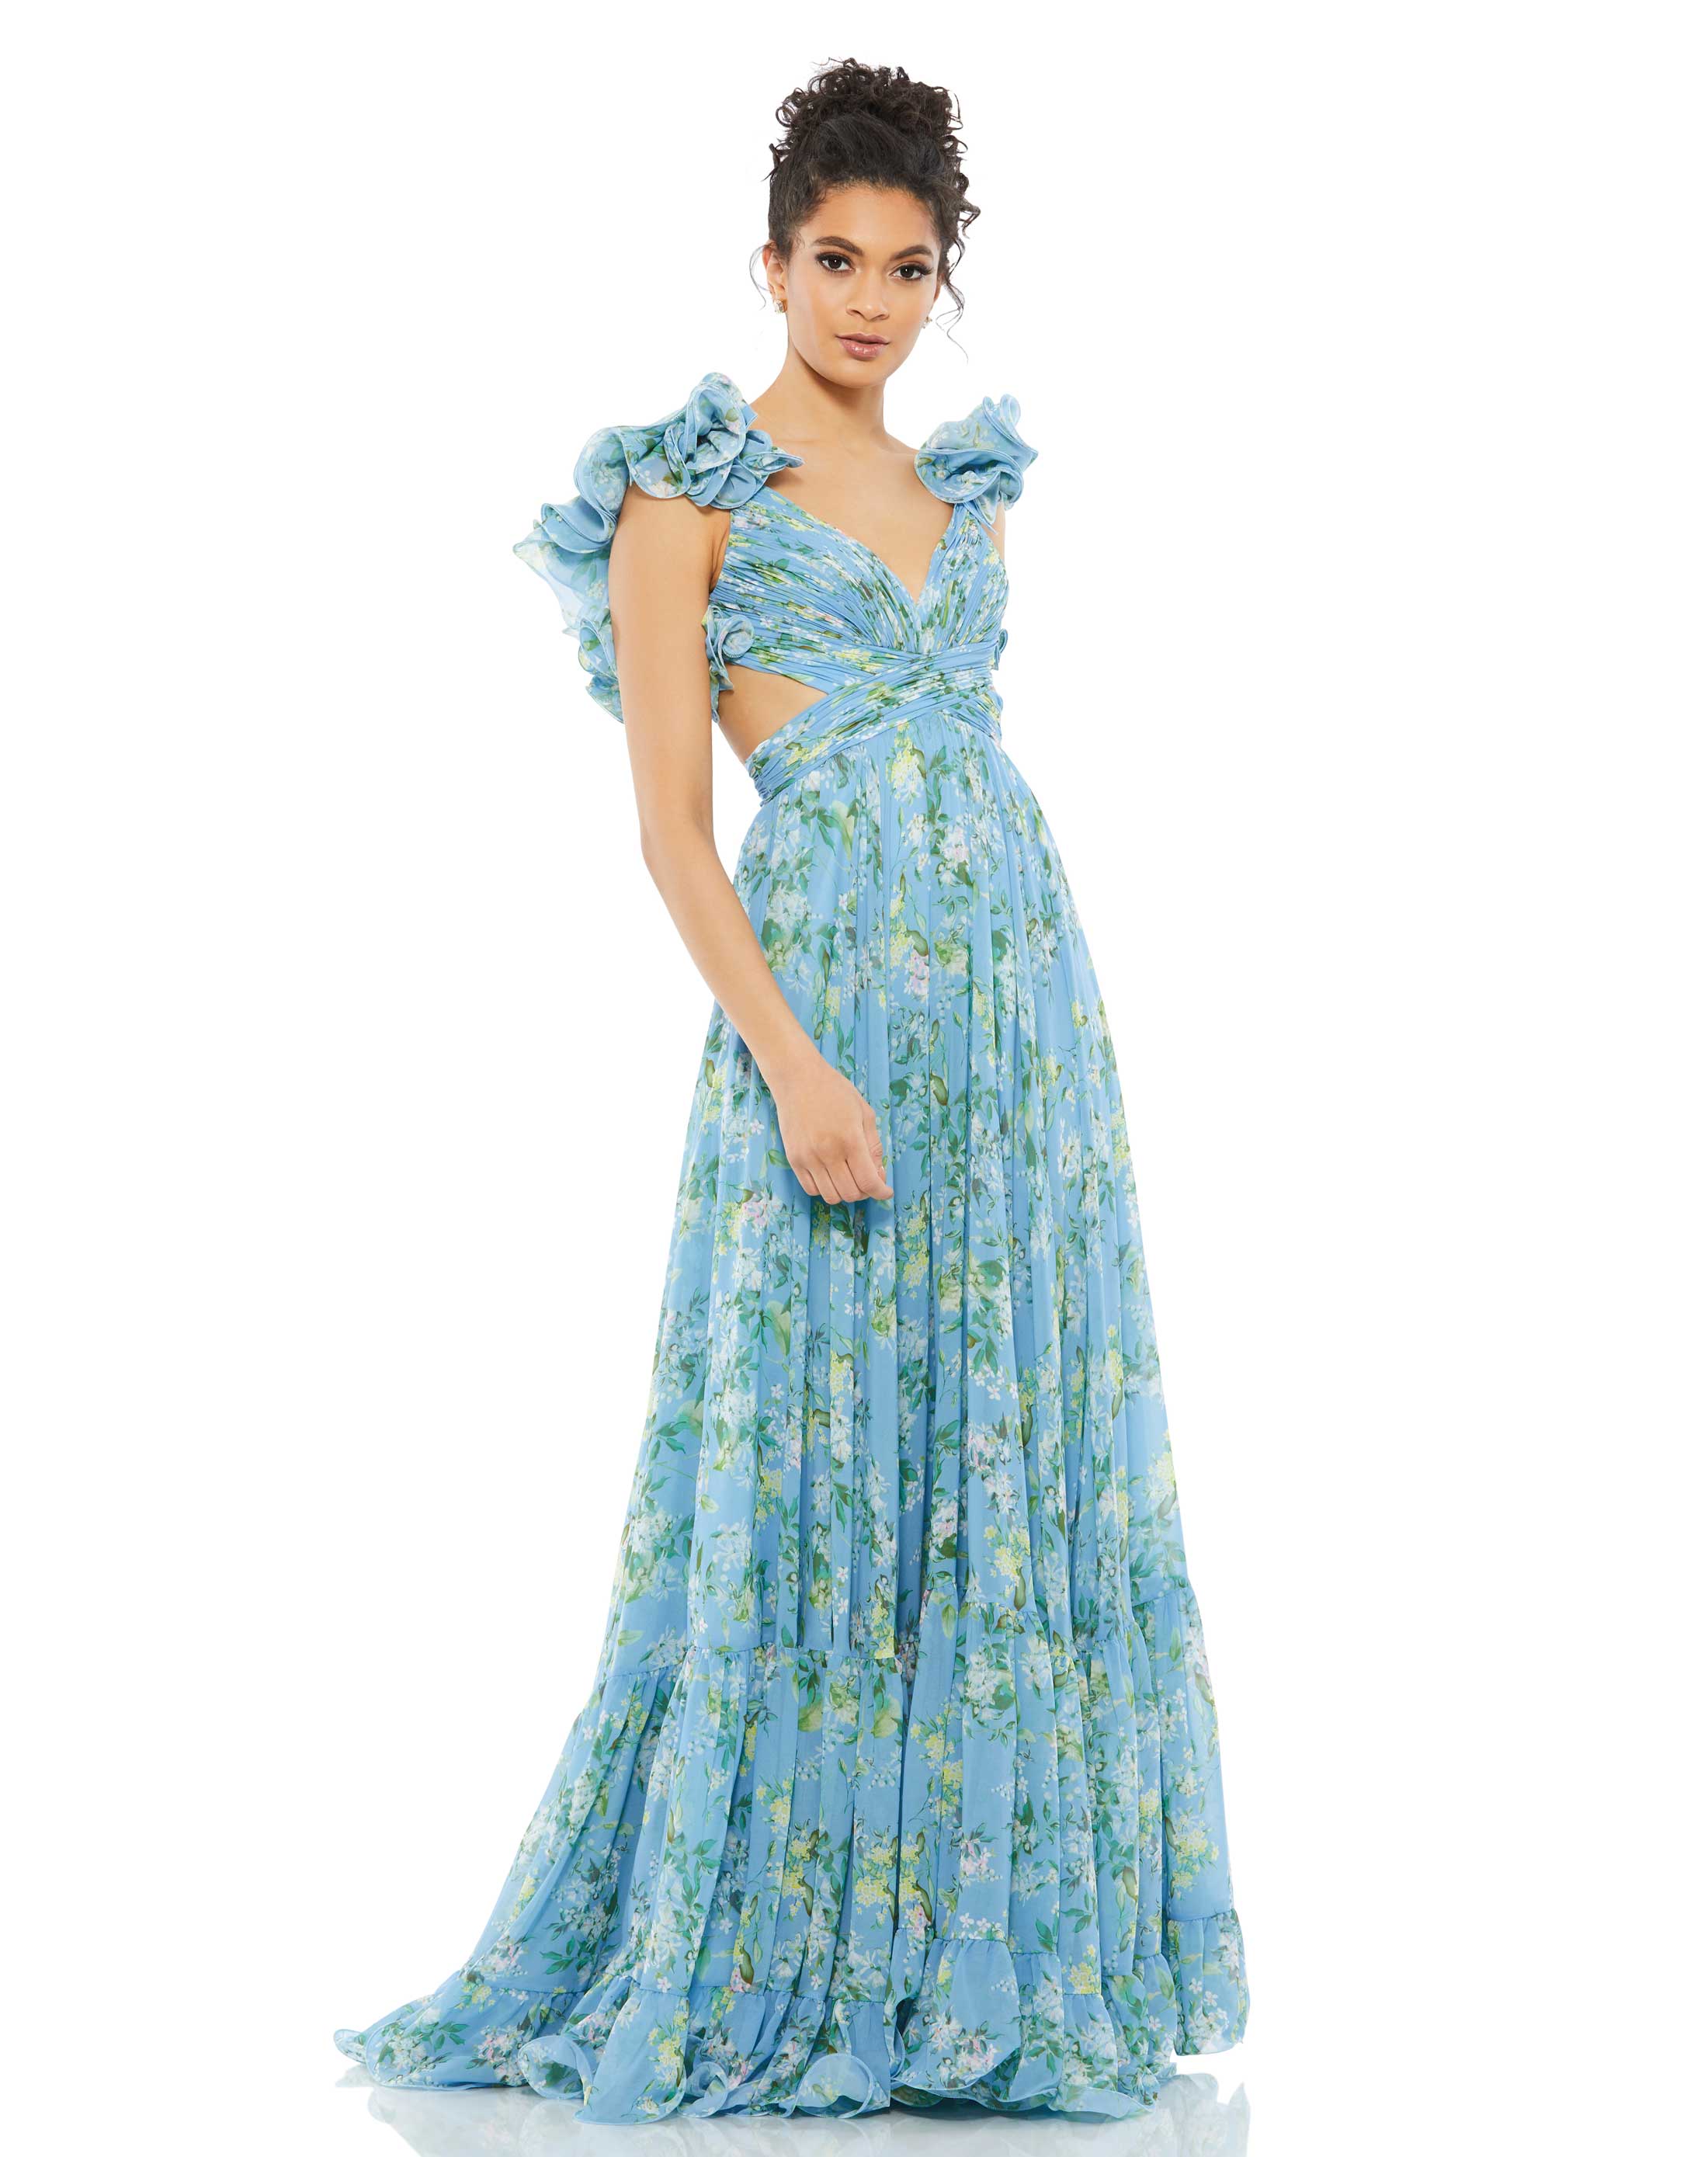 Ruffle Tiered Floral Cut-Out Chiffon Gown